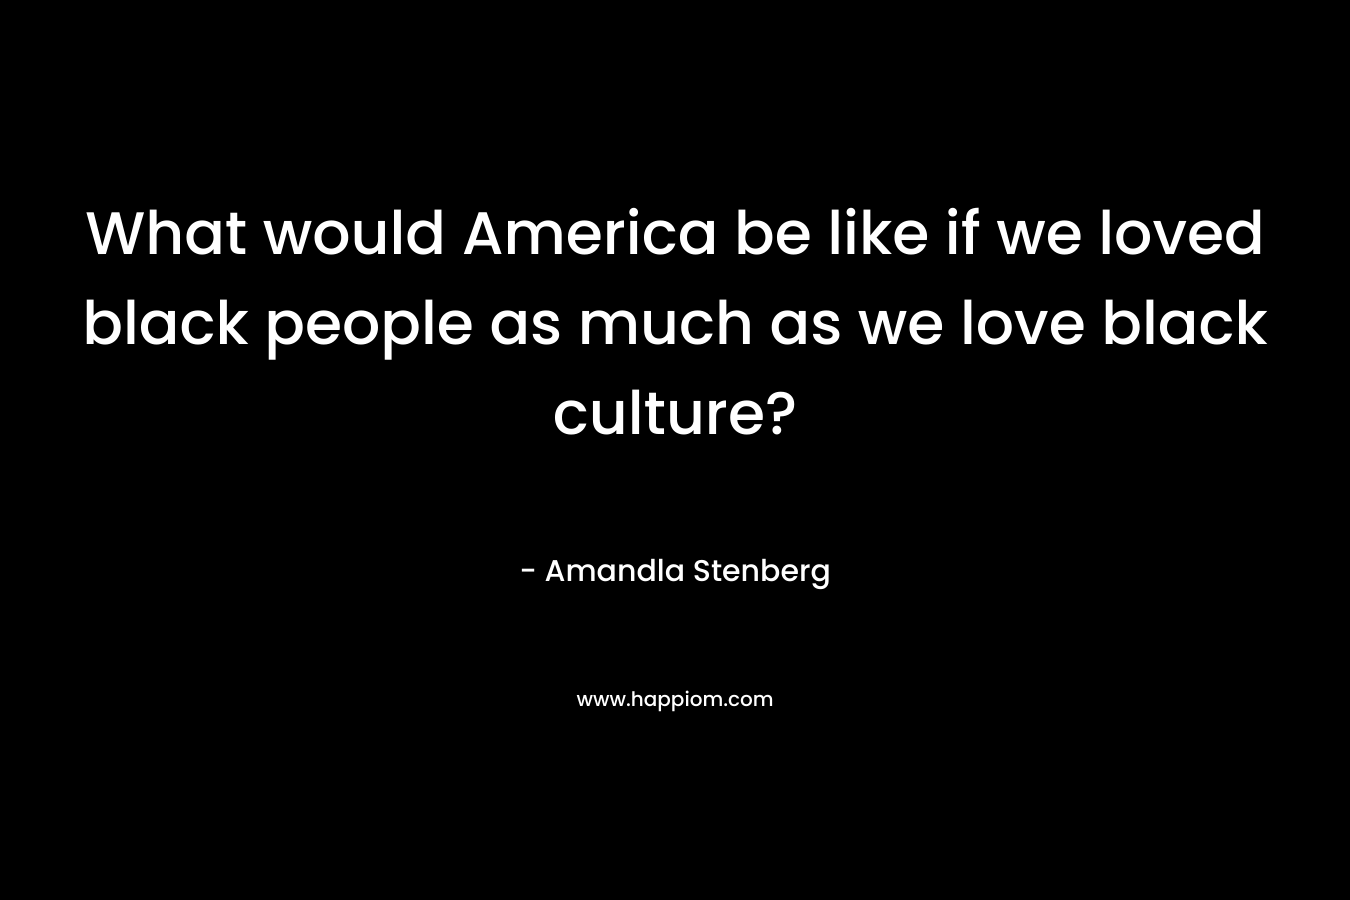 What would America be like if we loved black people as much as we love black culture? – Amandla Stenberg